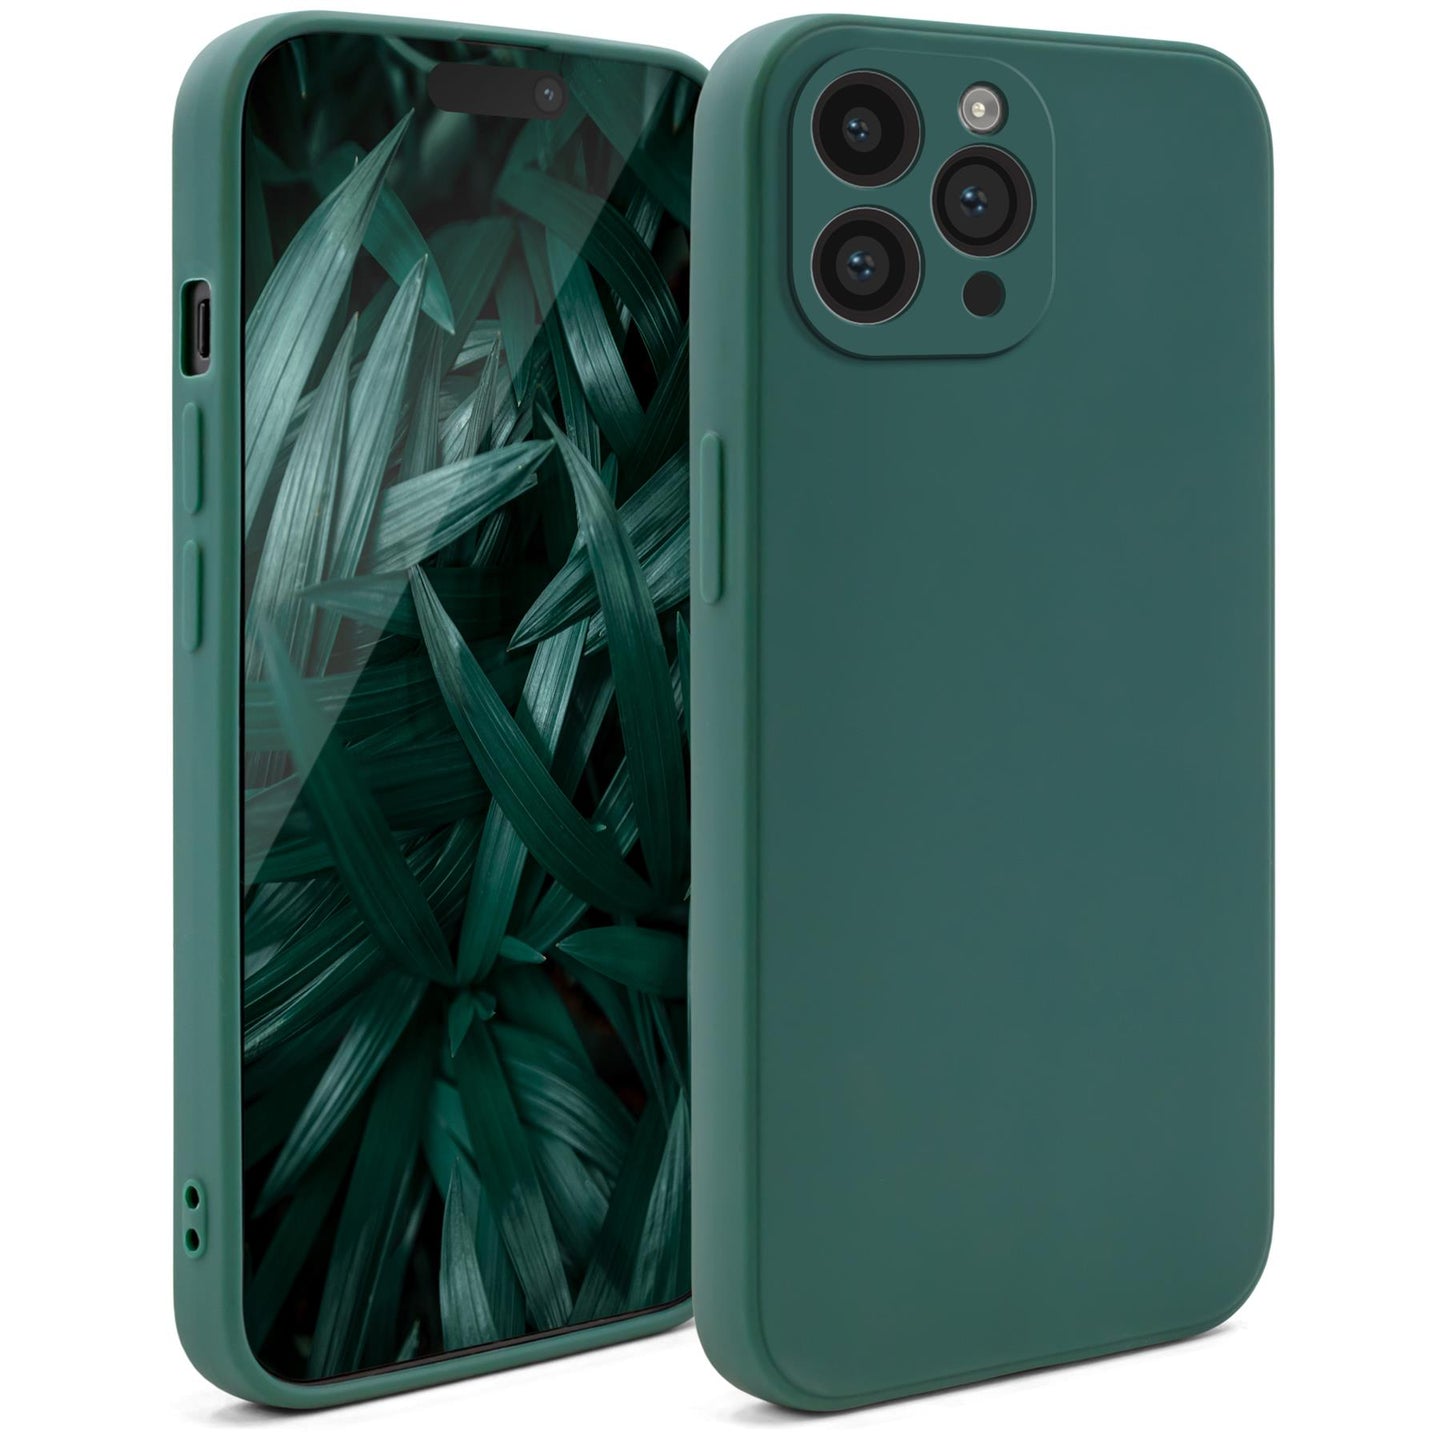 Moozy Minimalist Series Silicone Case for iPhone 14 Pro Max, Dark Green - Matte Finish Lightweight Mobile Phone Case Slim Soft Protective TPU Cover with Matte Surface